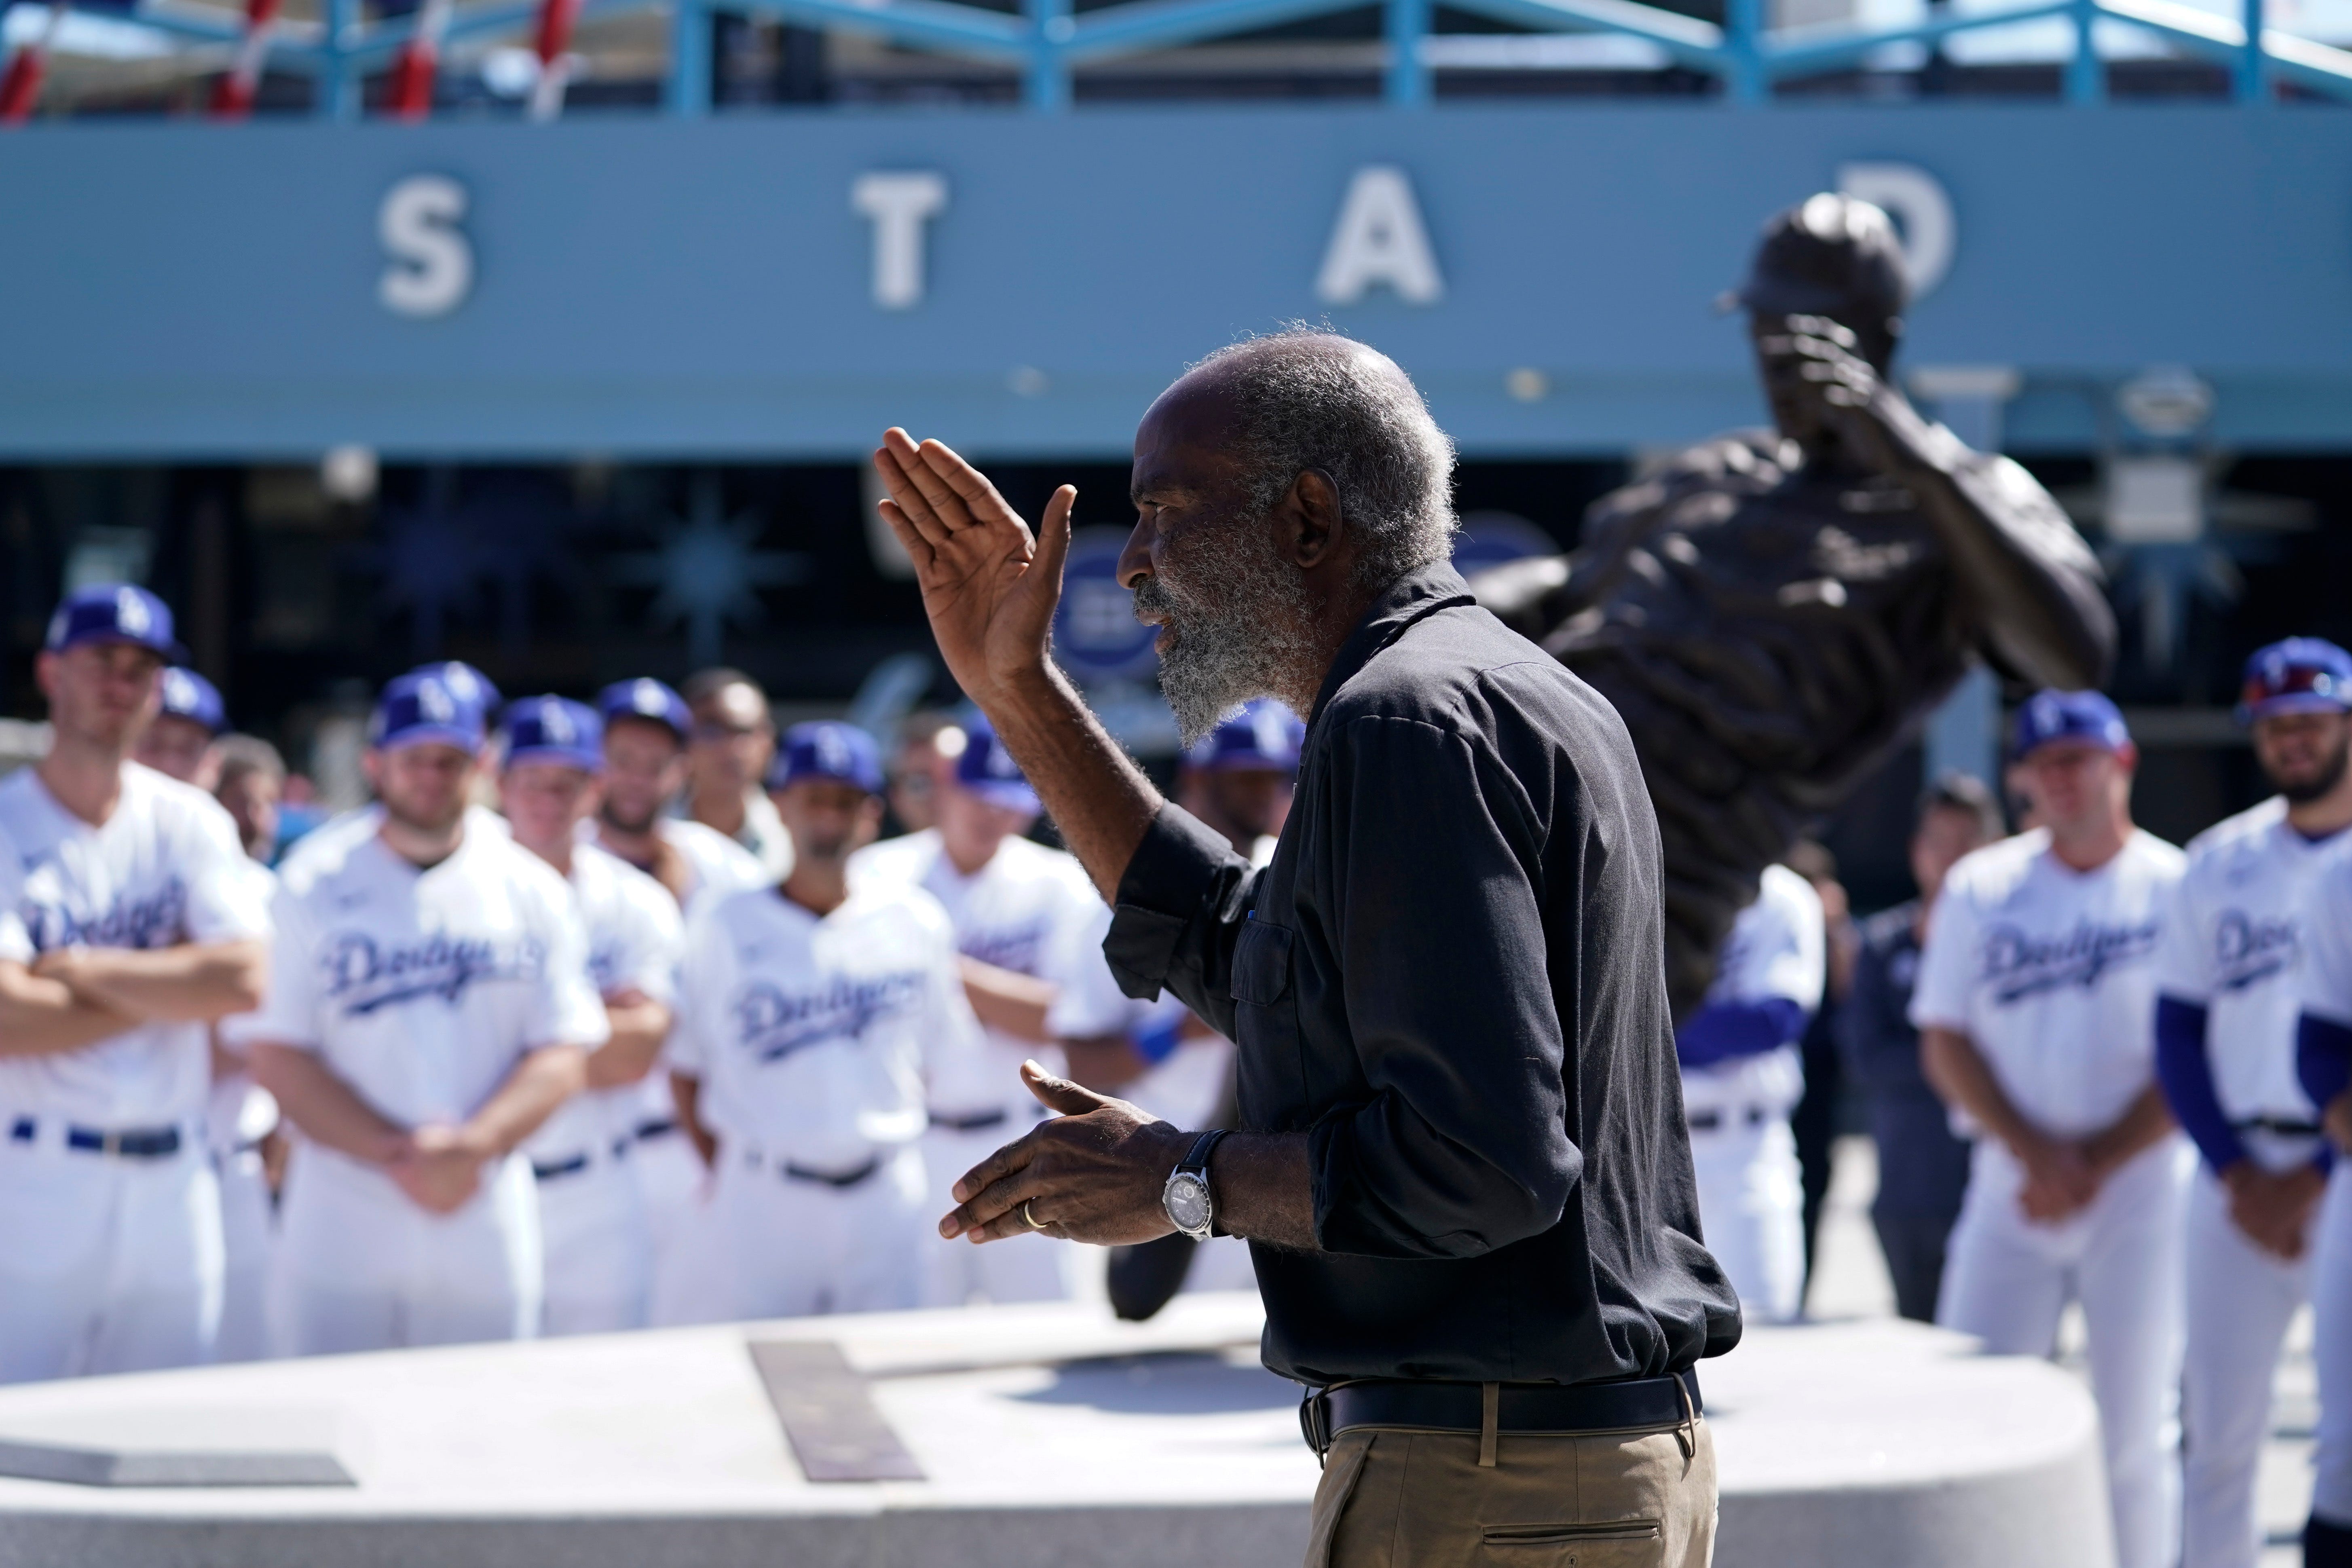 Jackie Robinsons Son Delivers Powerful Message To Dodgers On Th Anniversary Of His Father